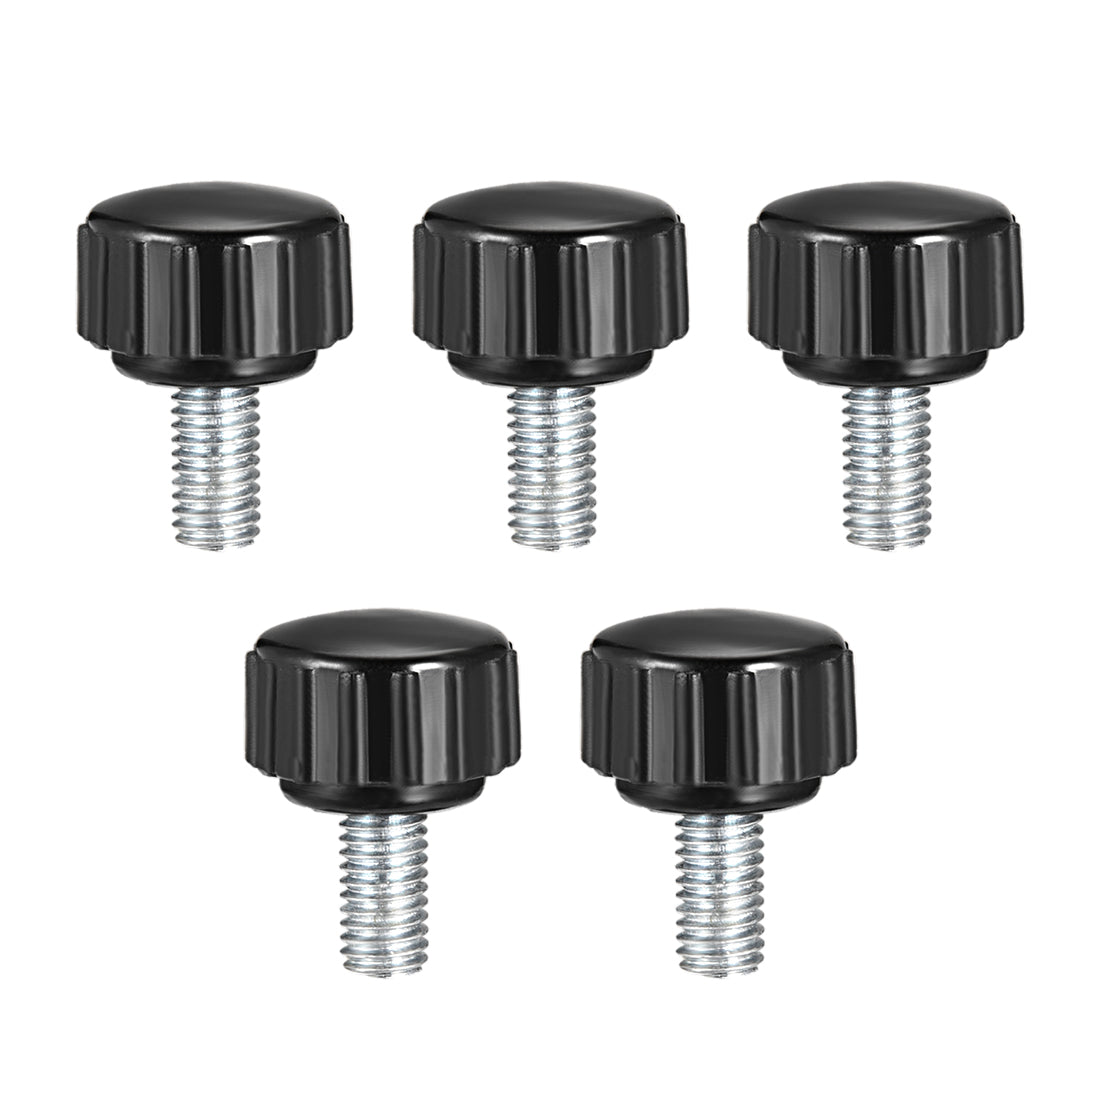 Uxcell Uxcell M6 x 20mm Male Thread Knurled Clamping Knobs Grip Thumb Screw on Type 5 Pcs